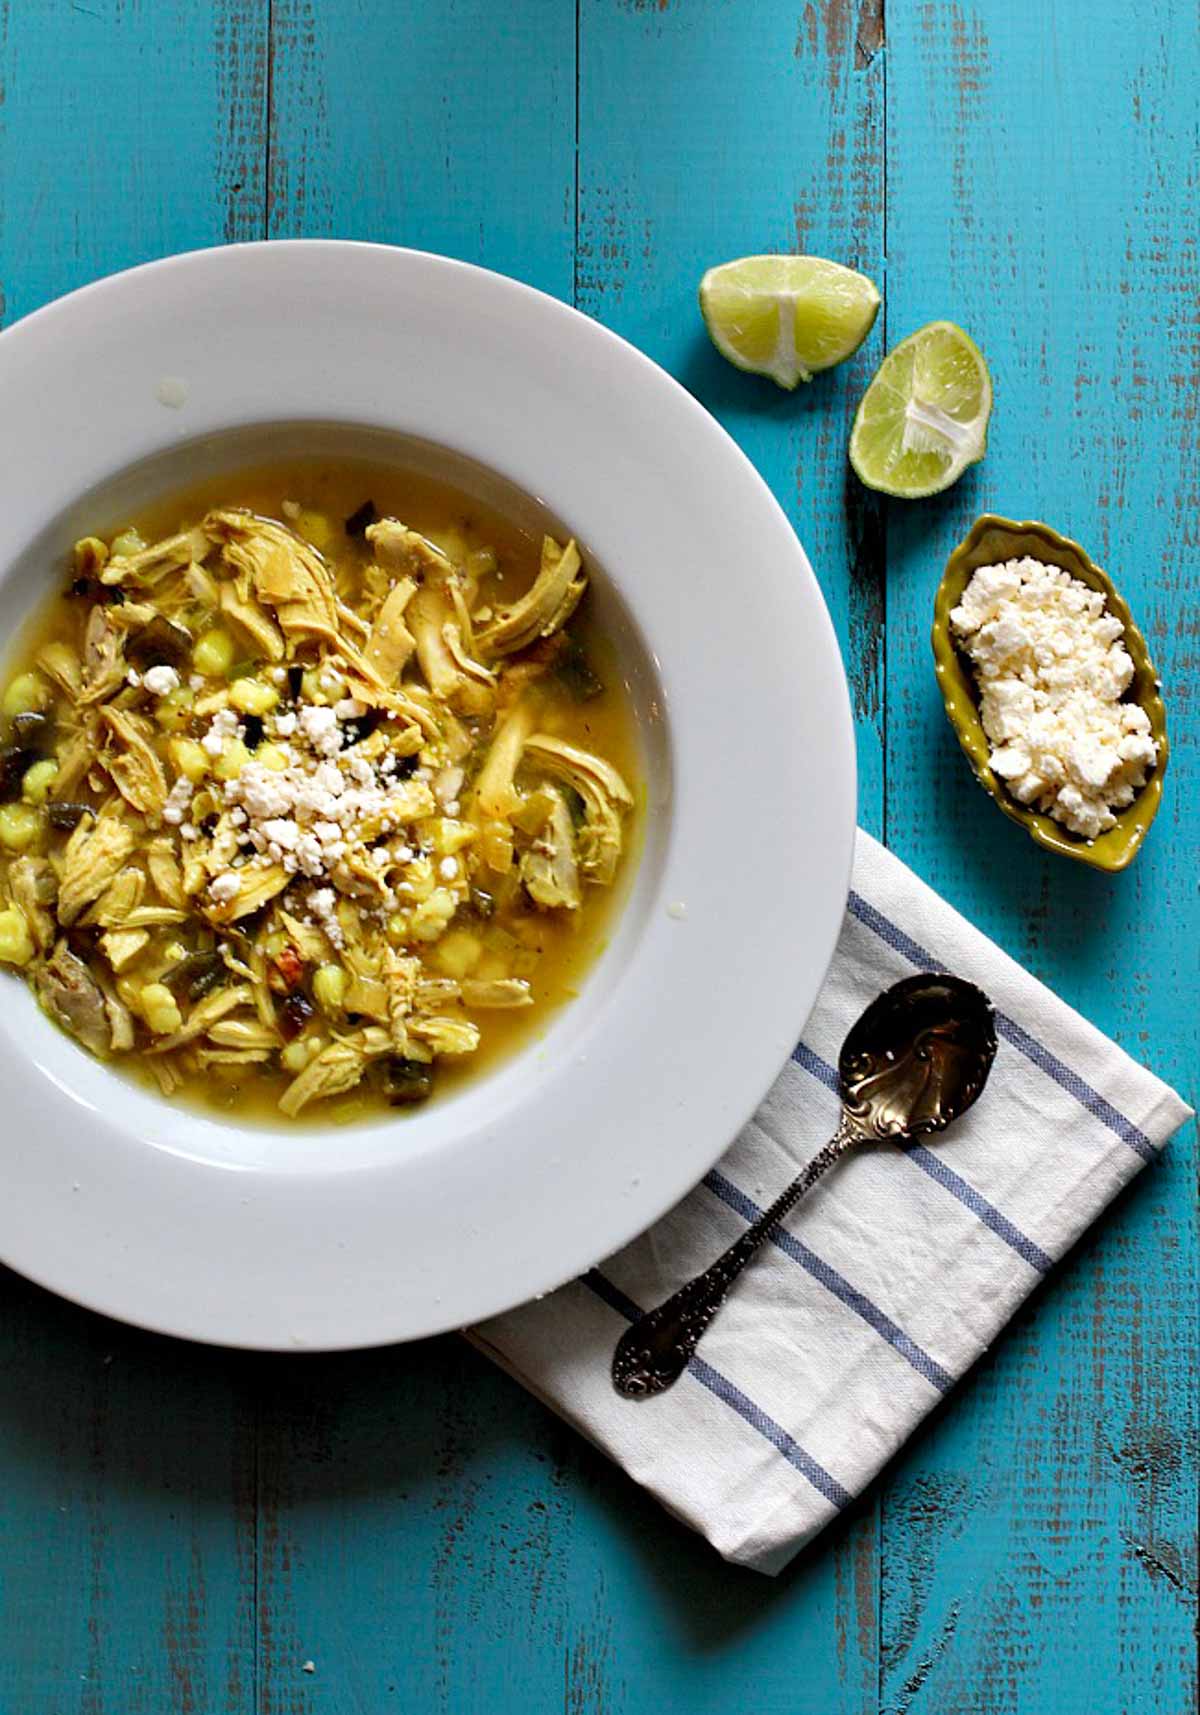 Chicken poblano soup with hominy and limes